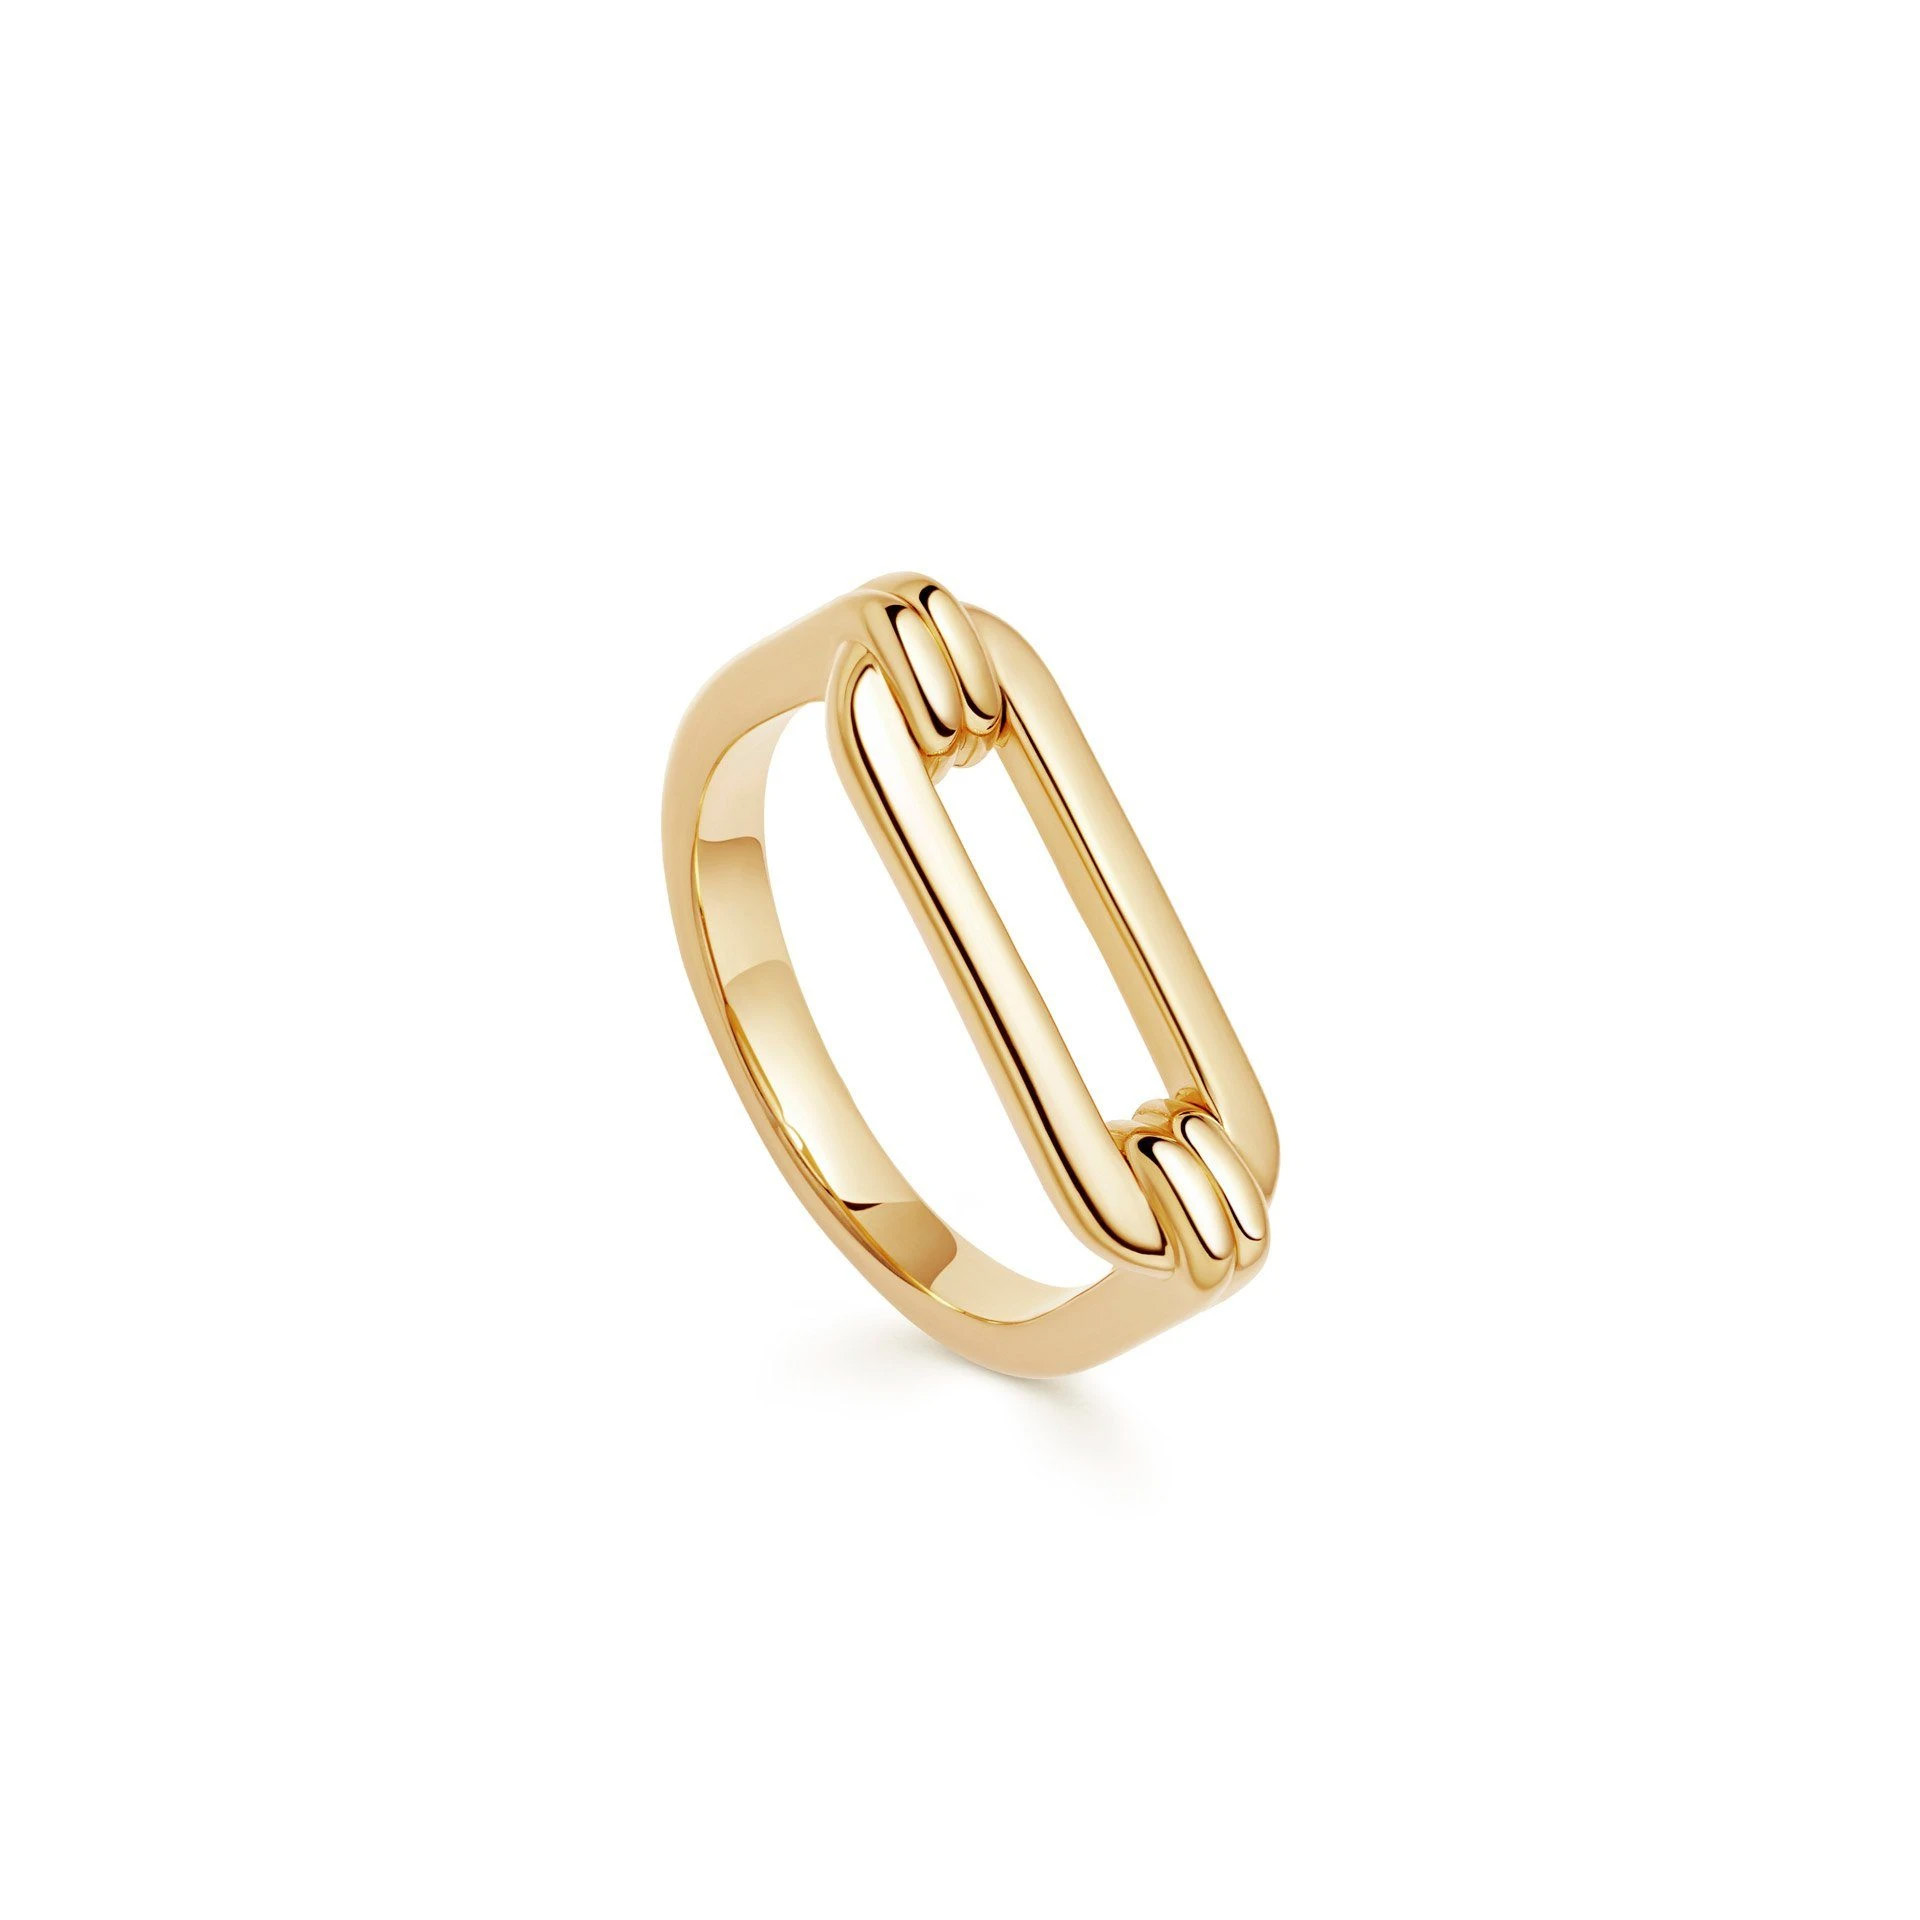 Wholesale Custom 18ct Gold Vermeil ring stack On Sterling Silver 20 years OEM/ODM Jewelry experience in OEM jewelry